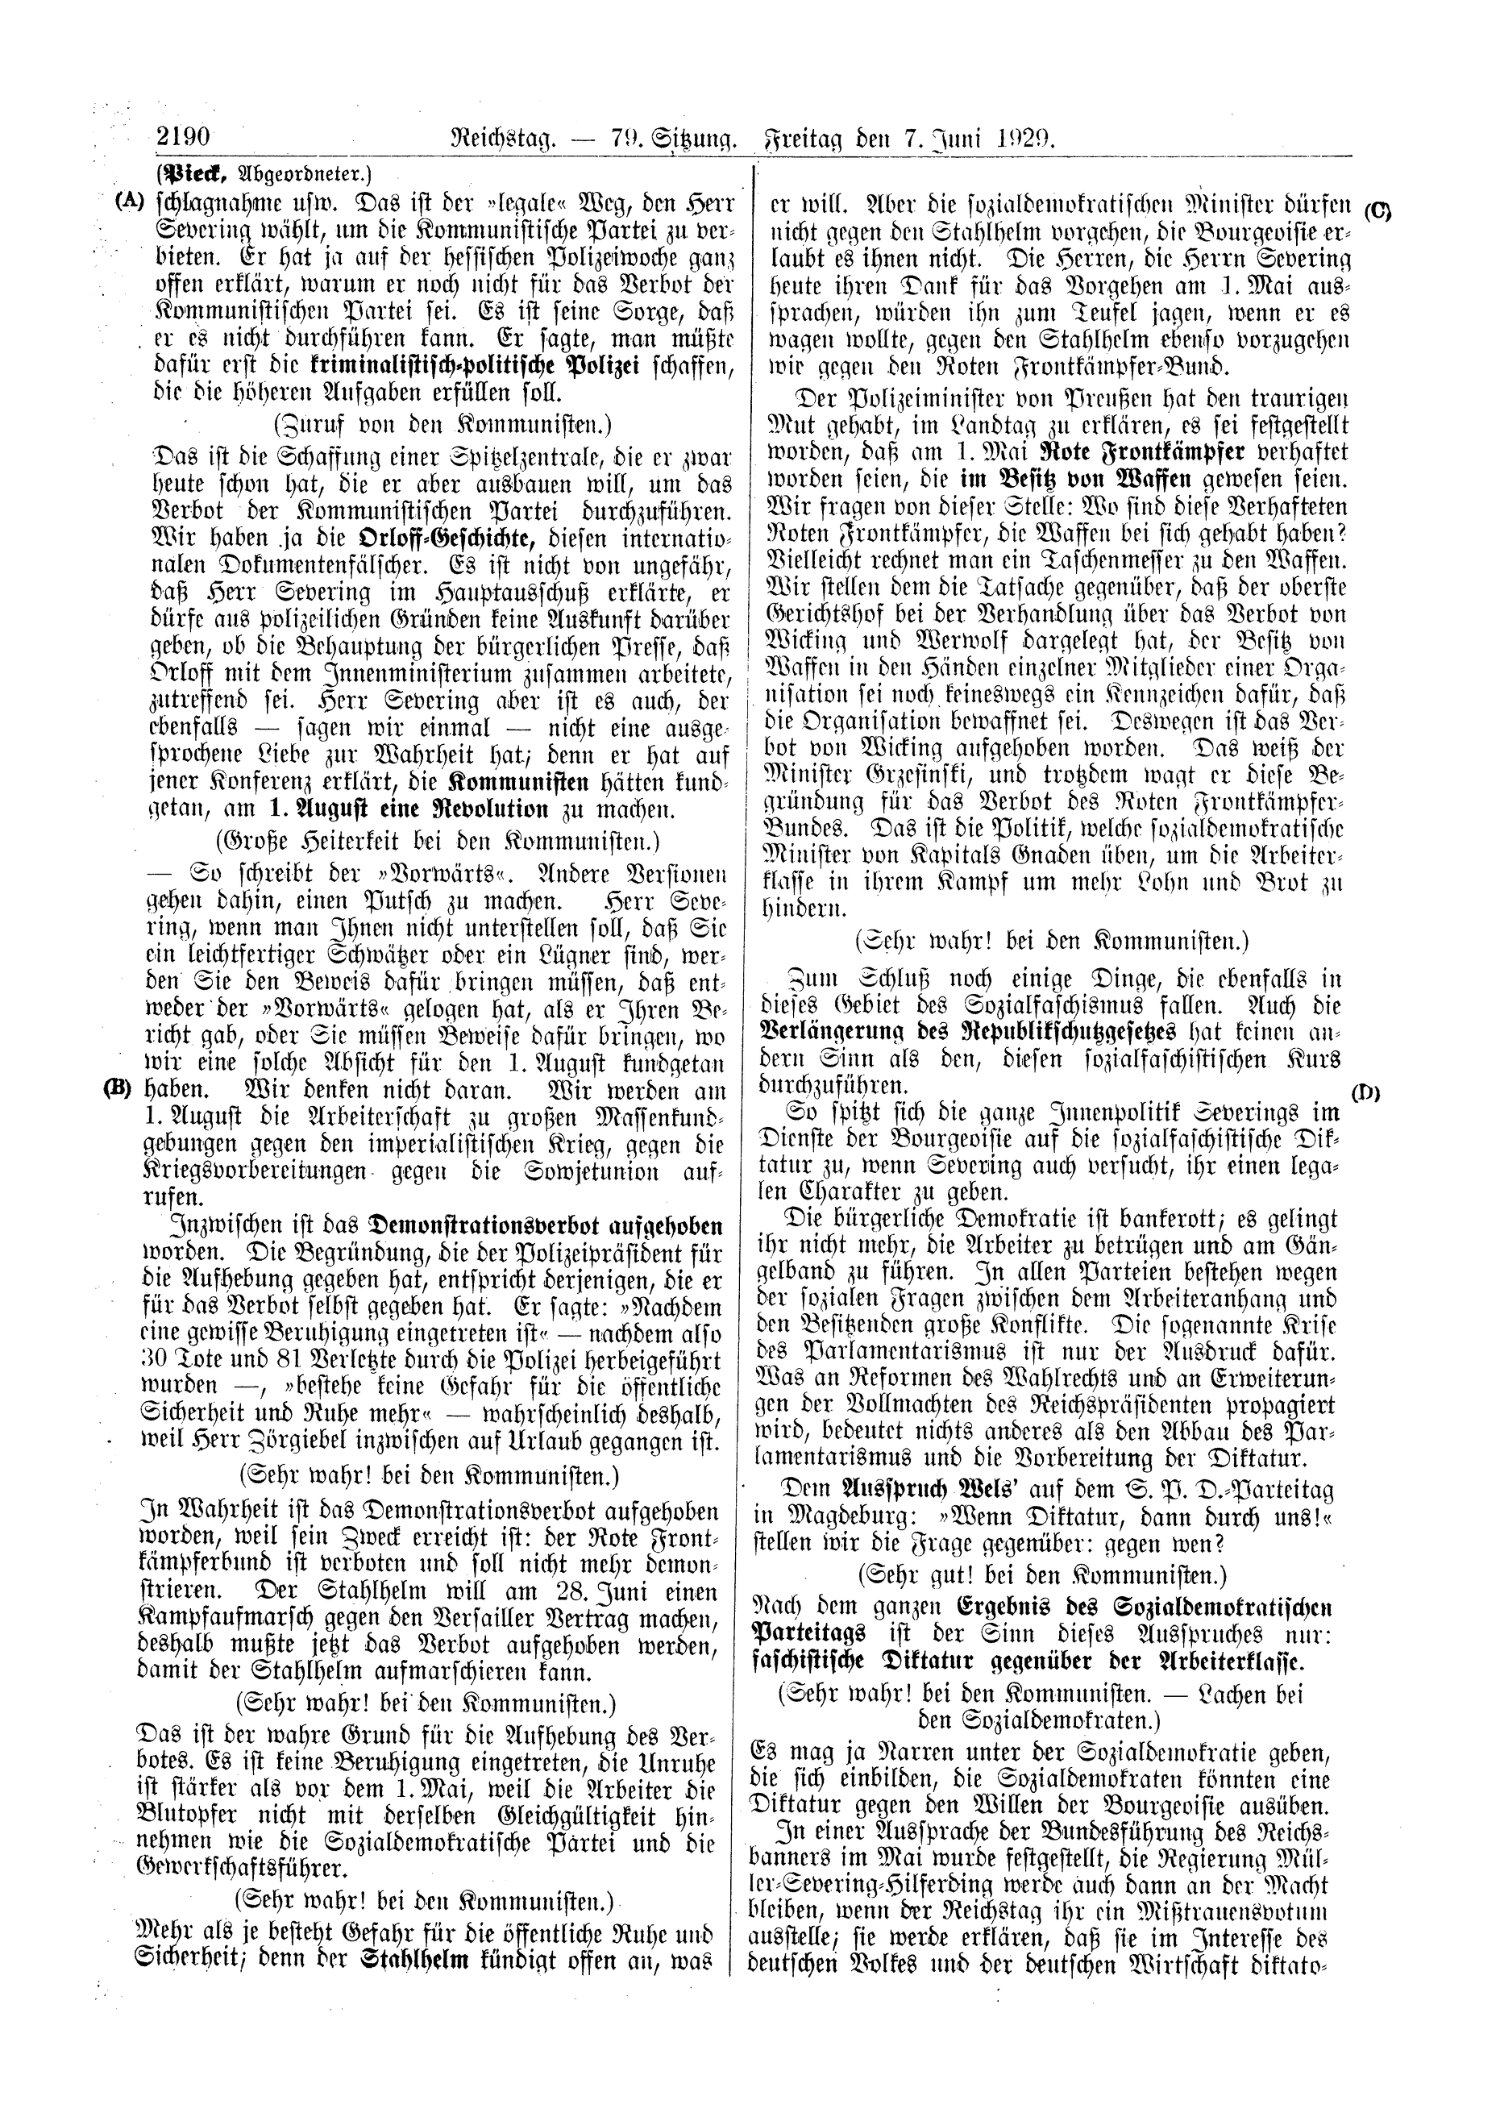 Scan of page 2190